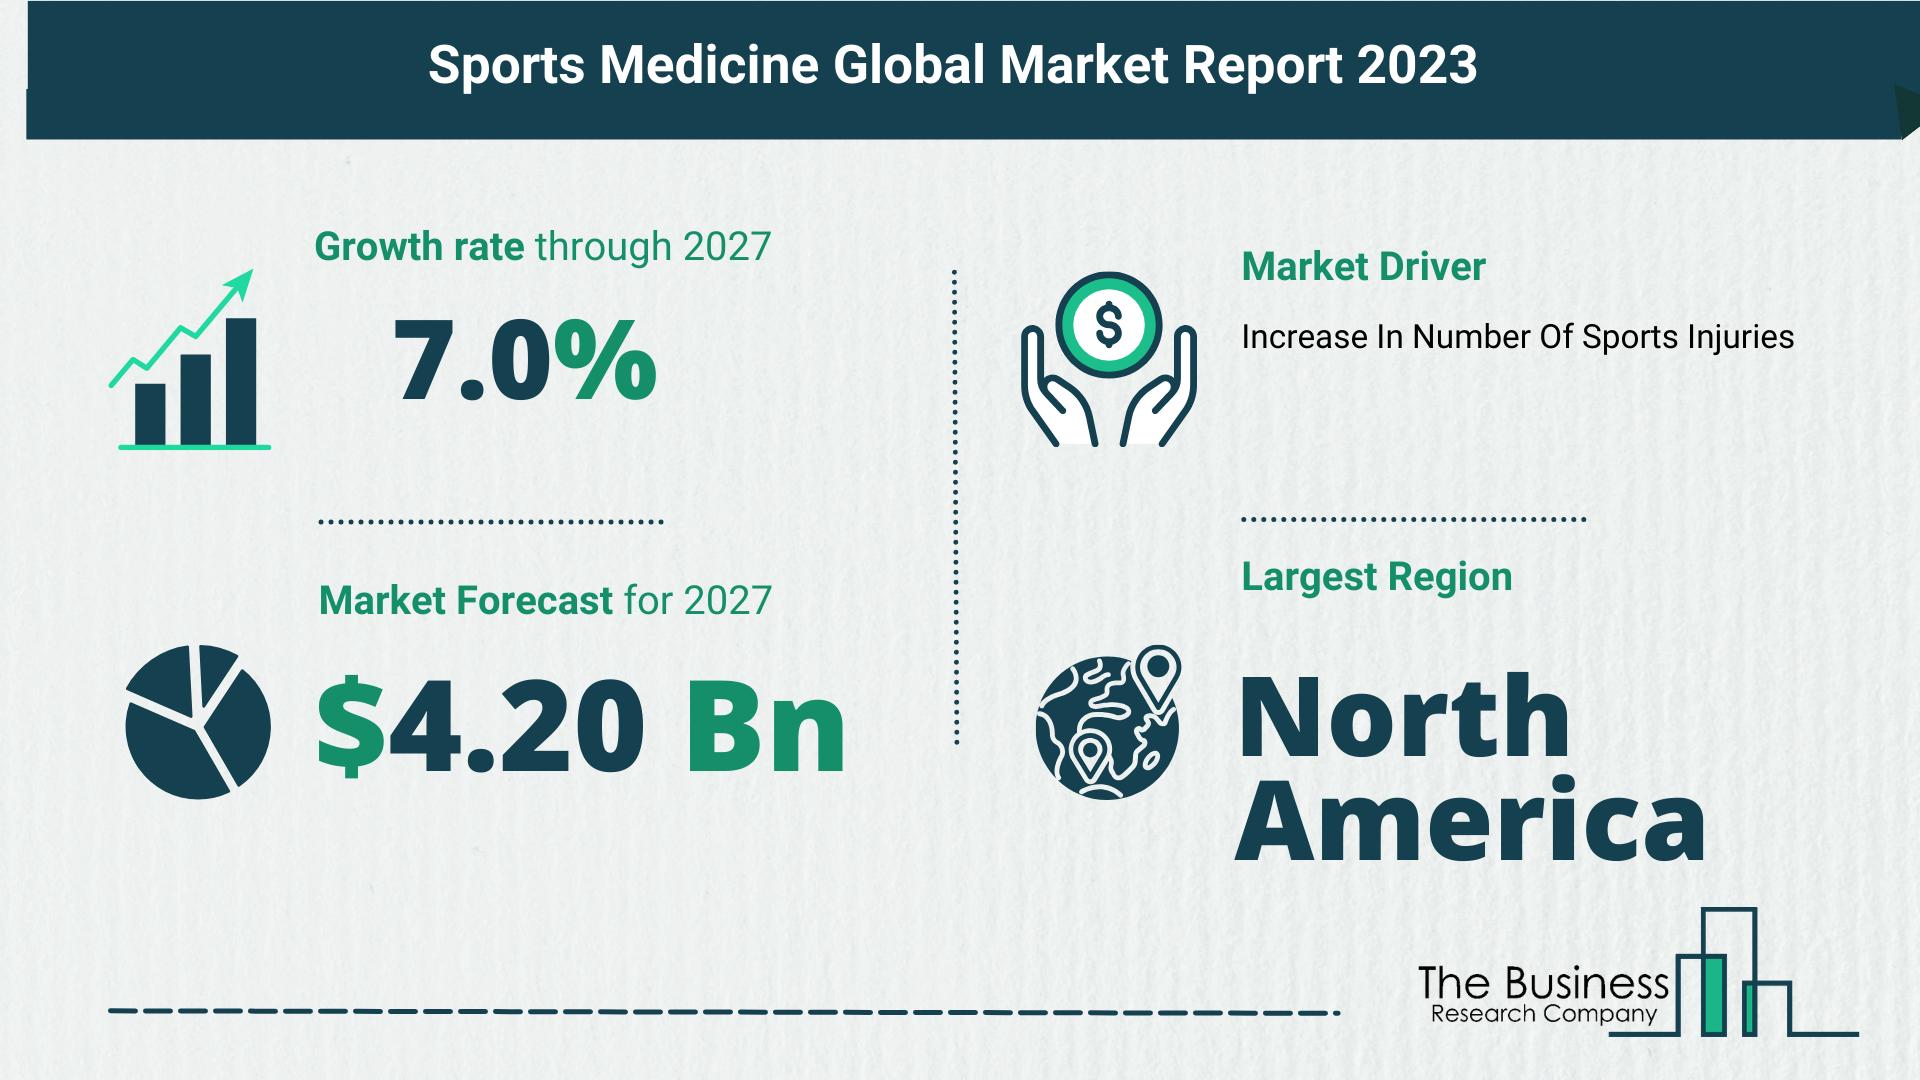 How Will The Sports Medicine Market Size Grow In The Coming Years